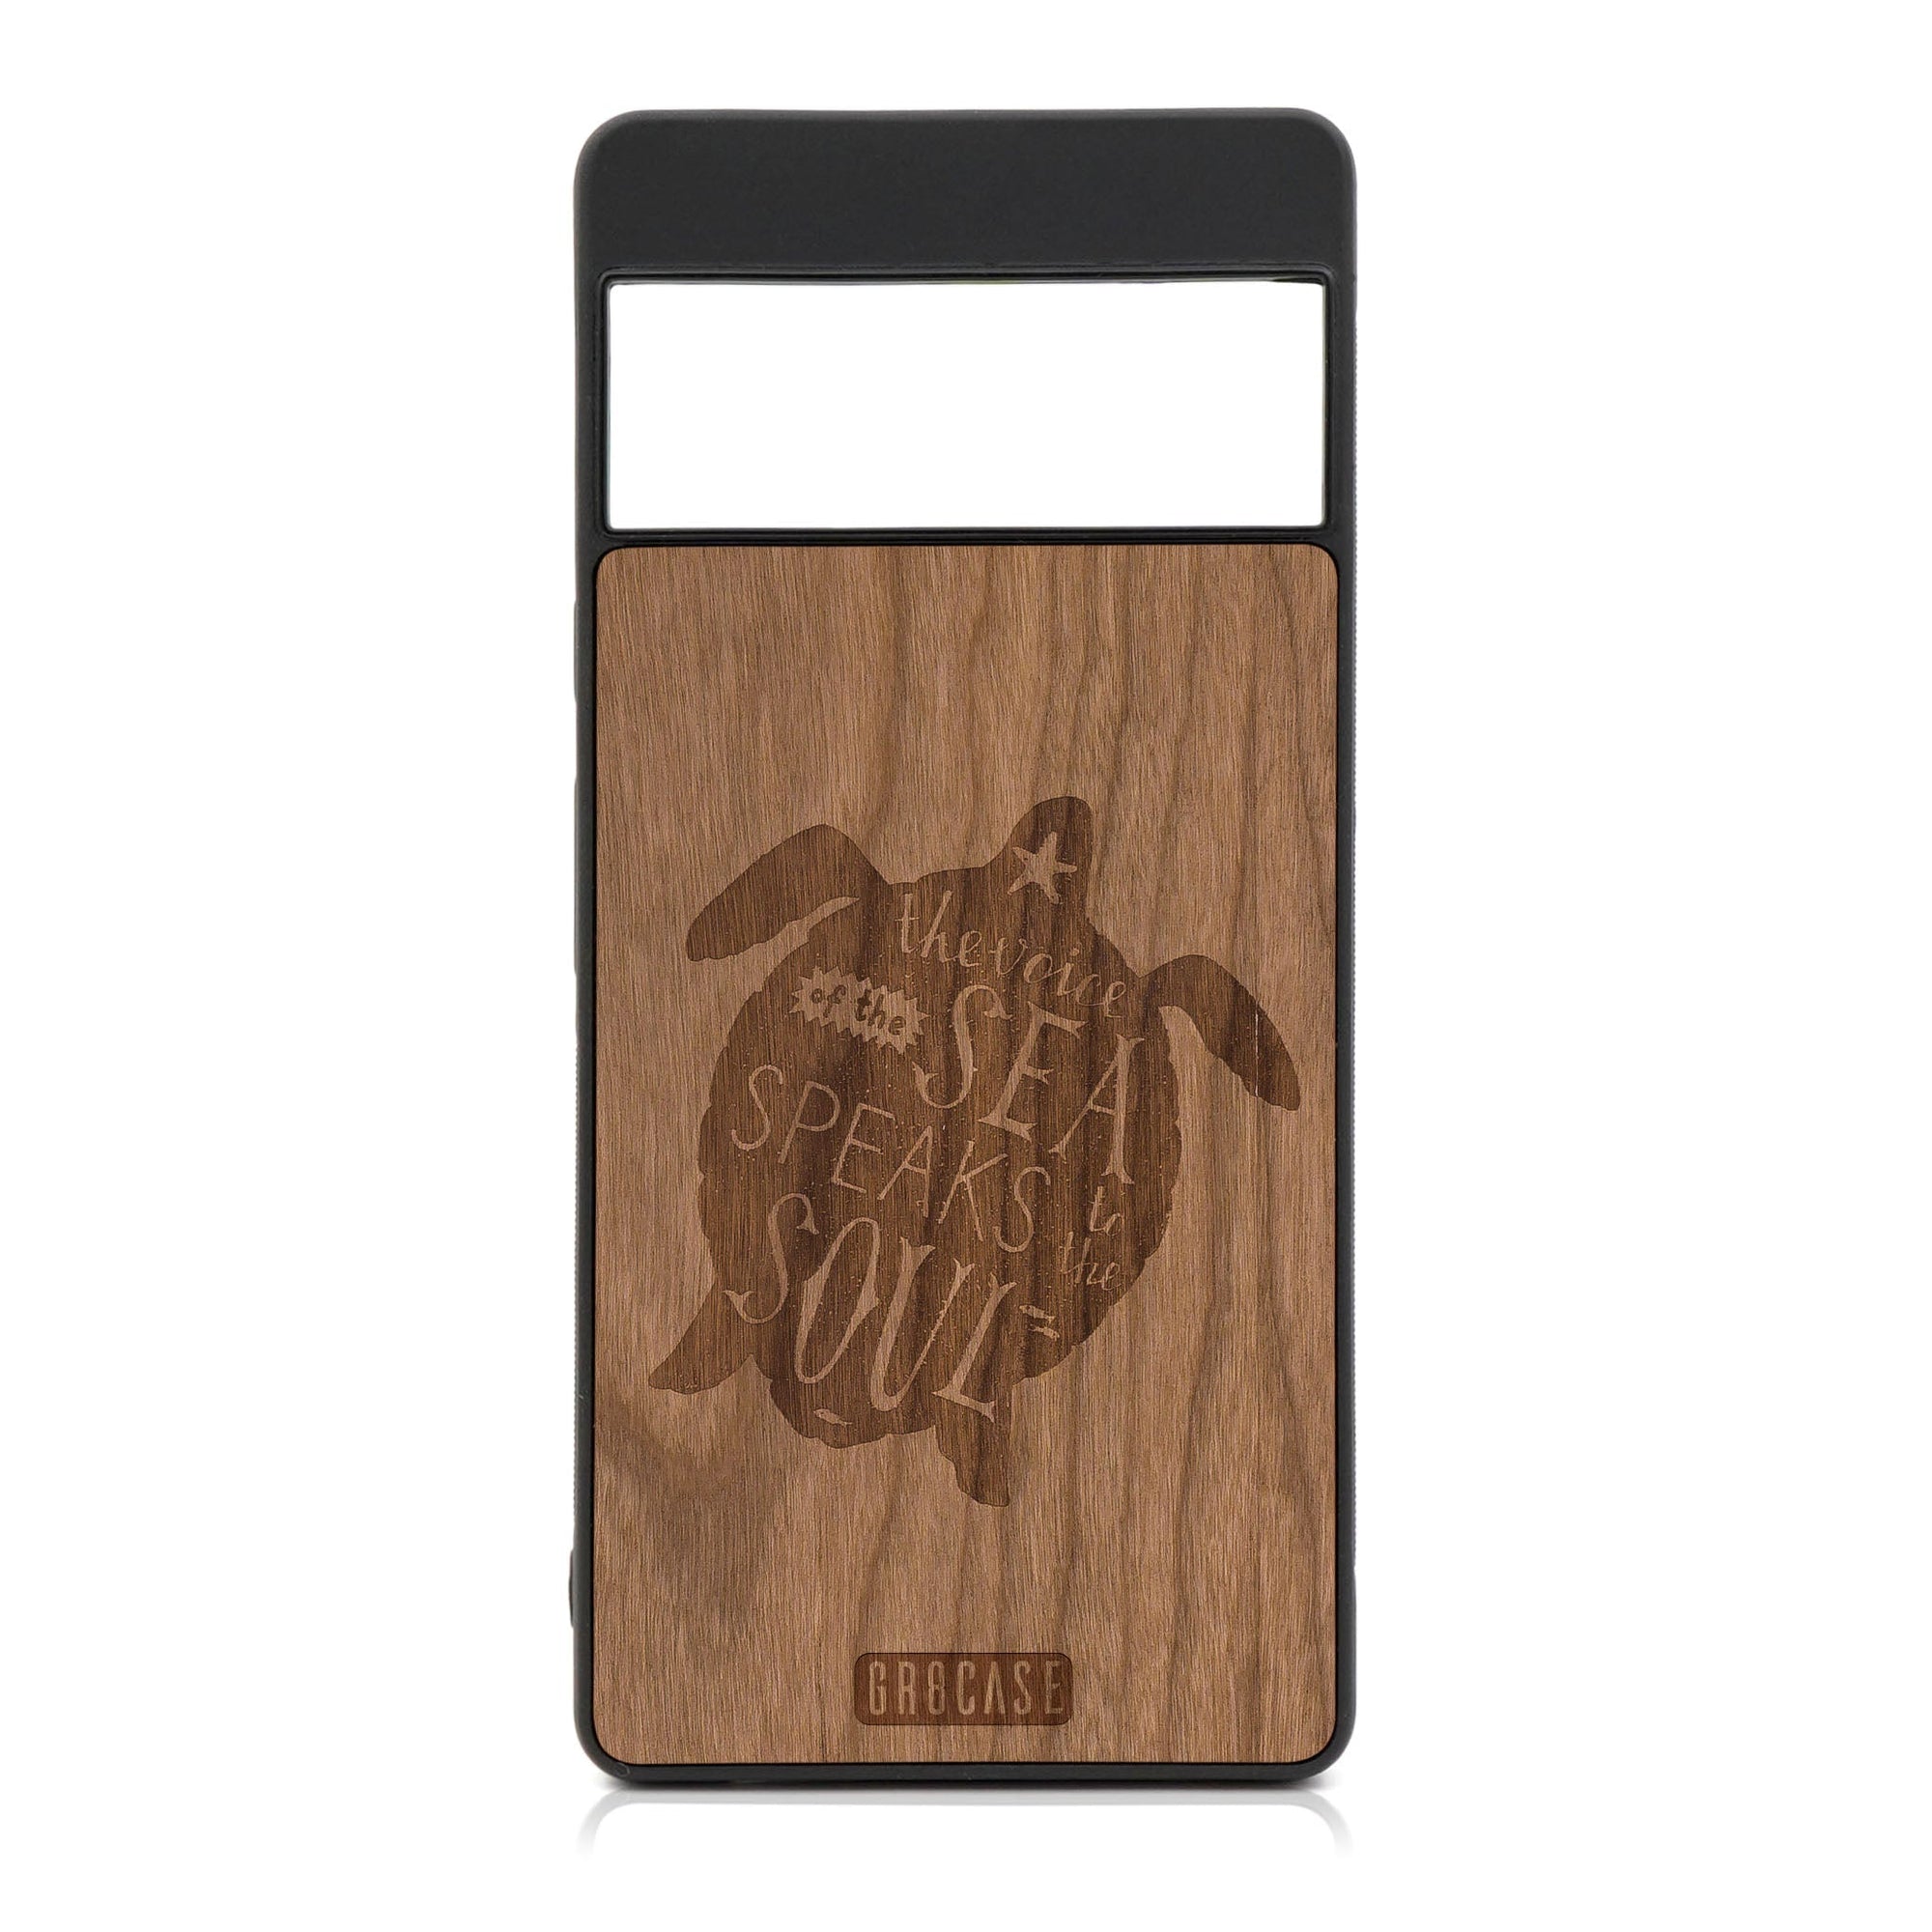 The Voice Of The Sea Speaks To The Soul (Turtle) Design Wood Case For Google Pixel 7 Pro